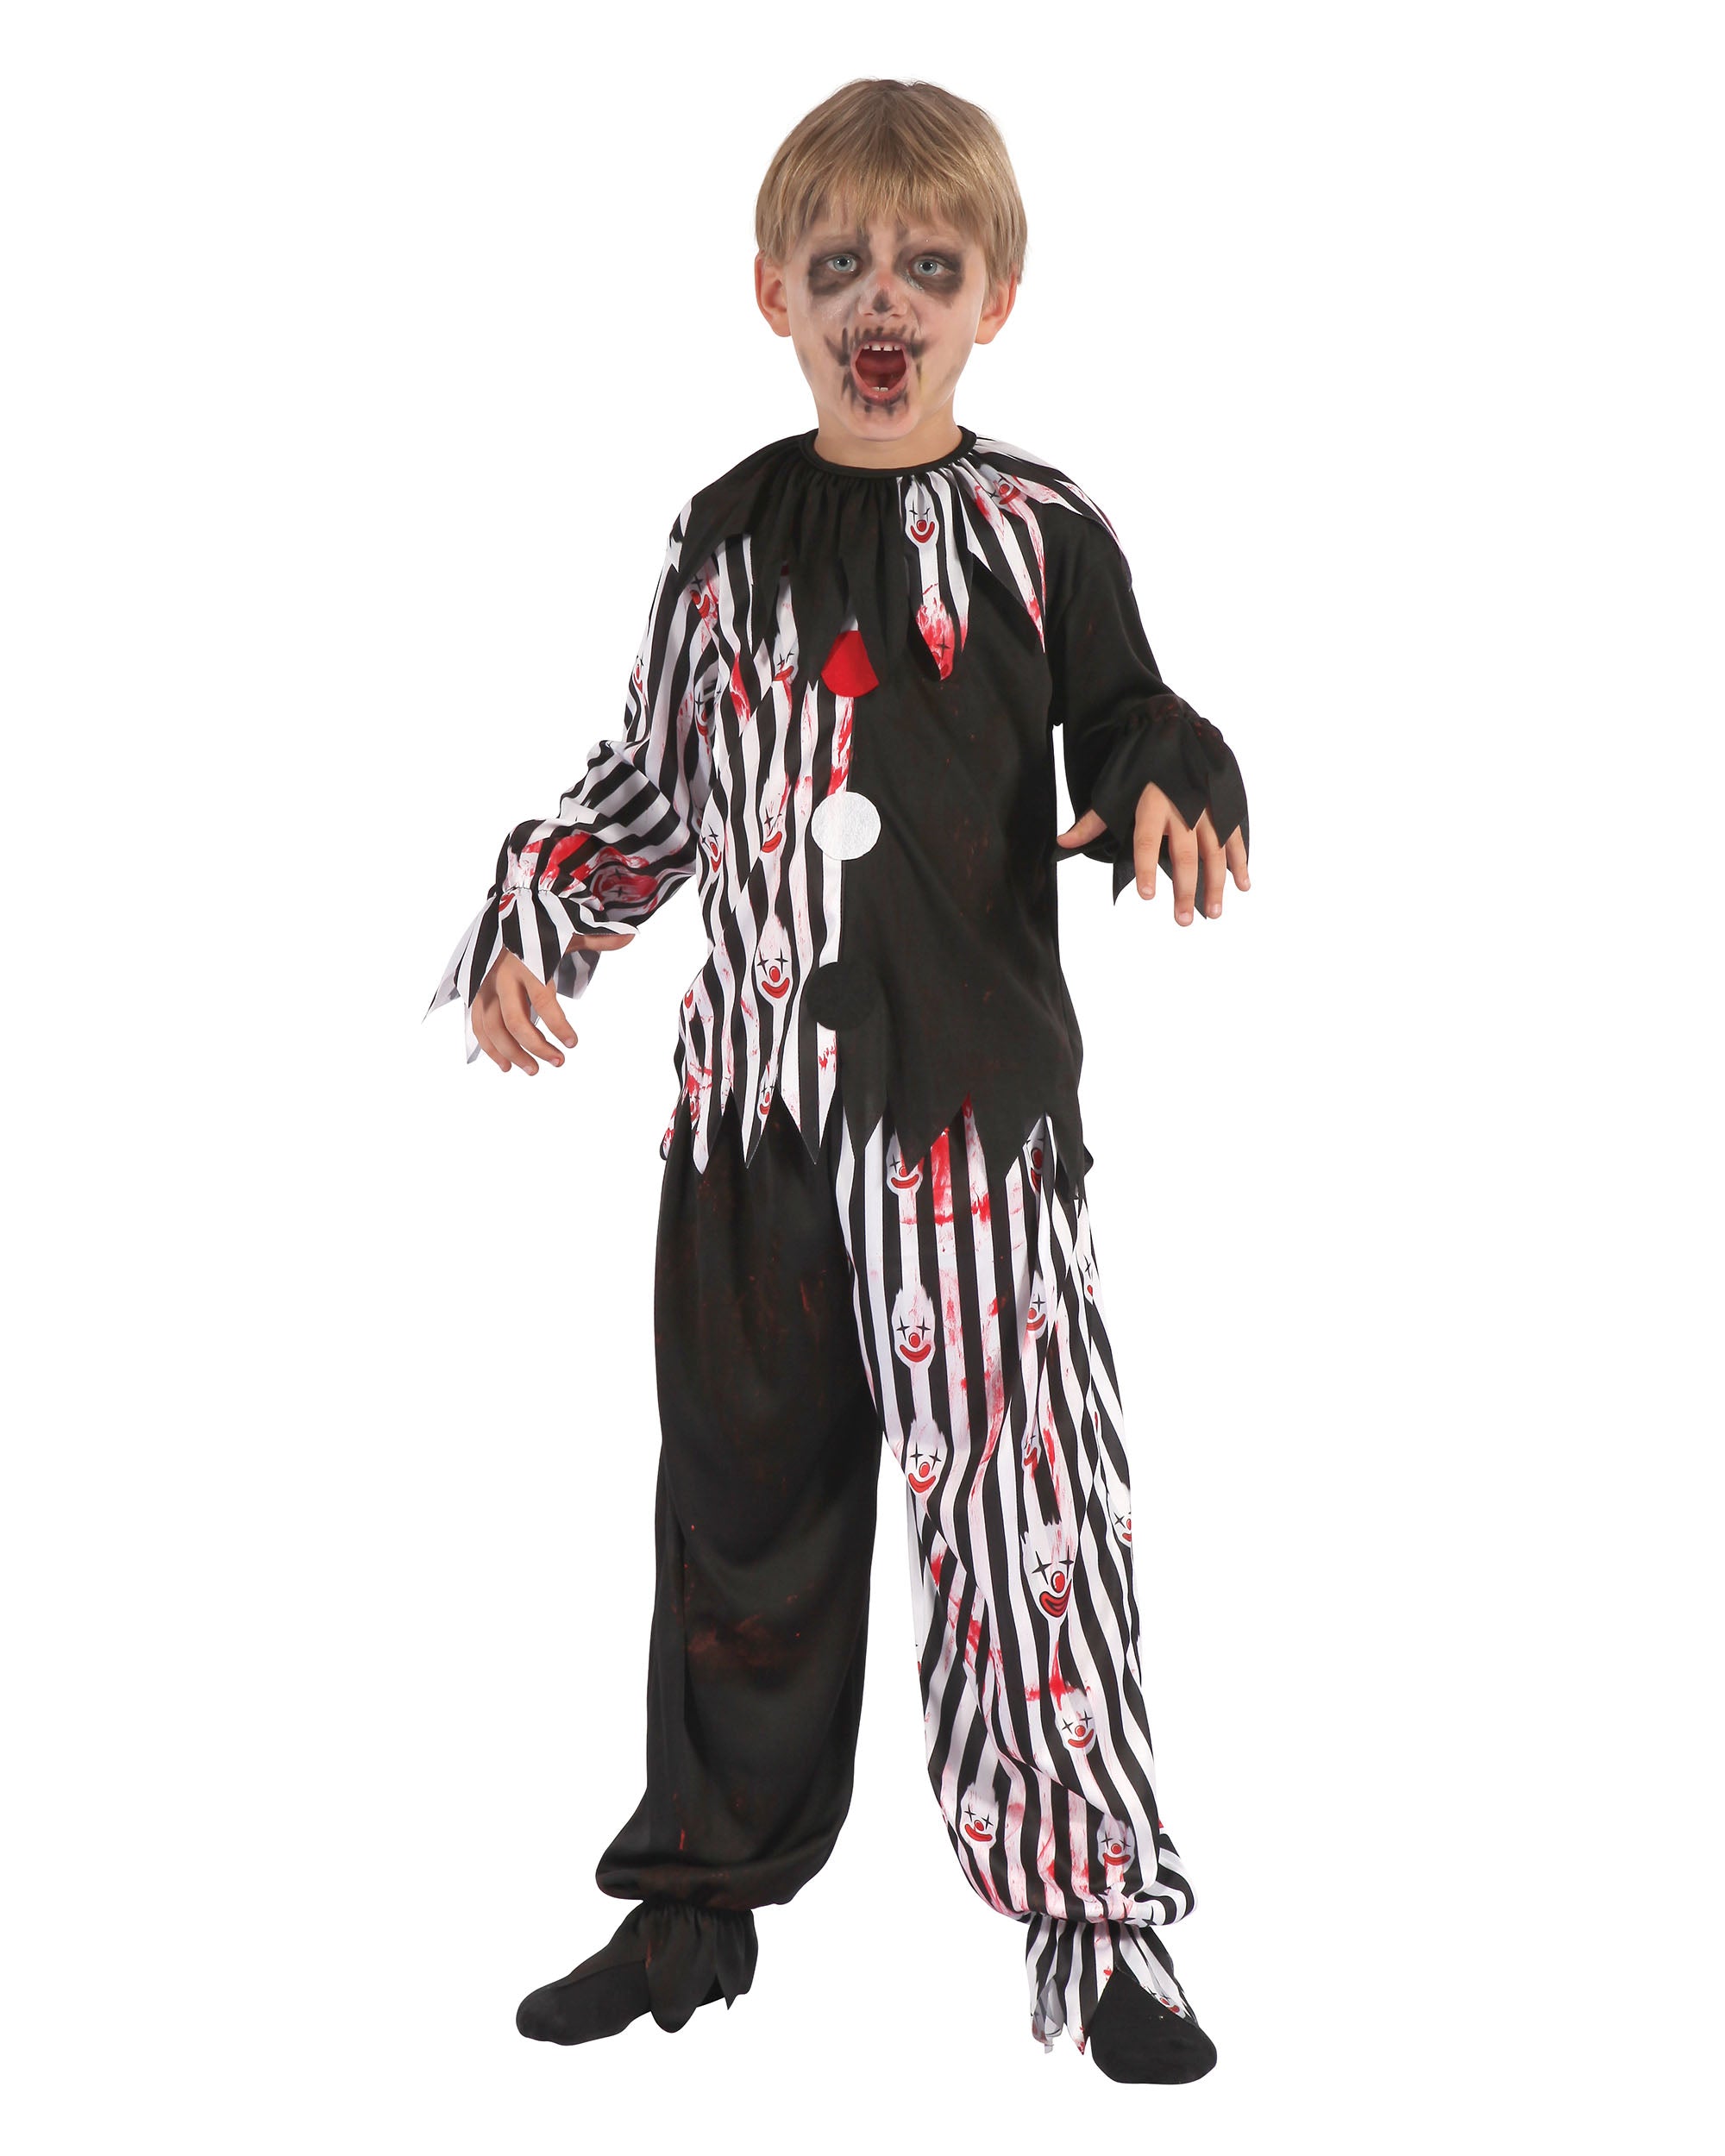 Bloody Harlequin Clown Costume for a boy